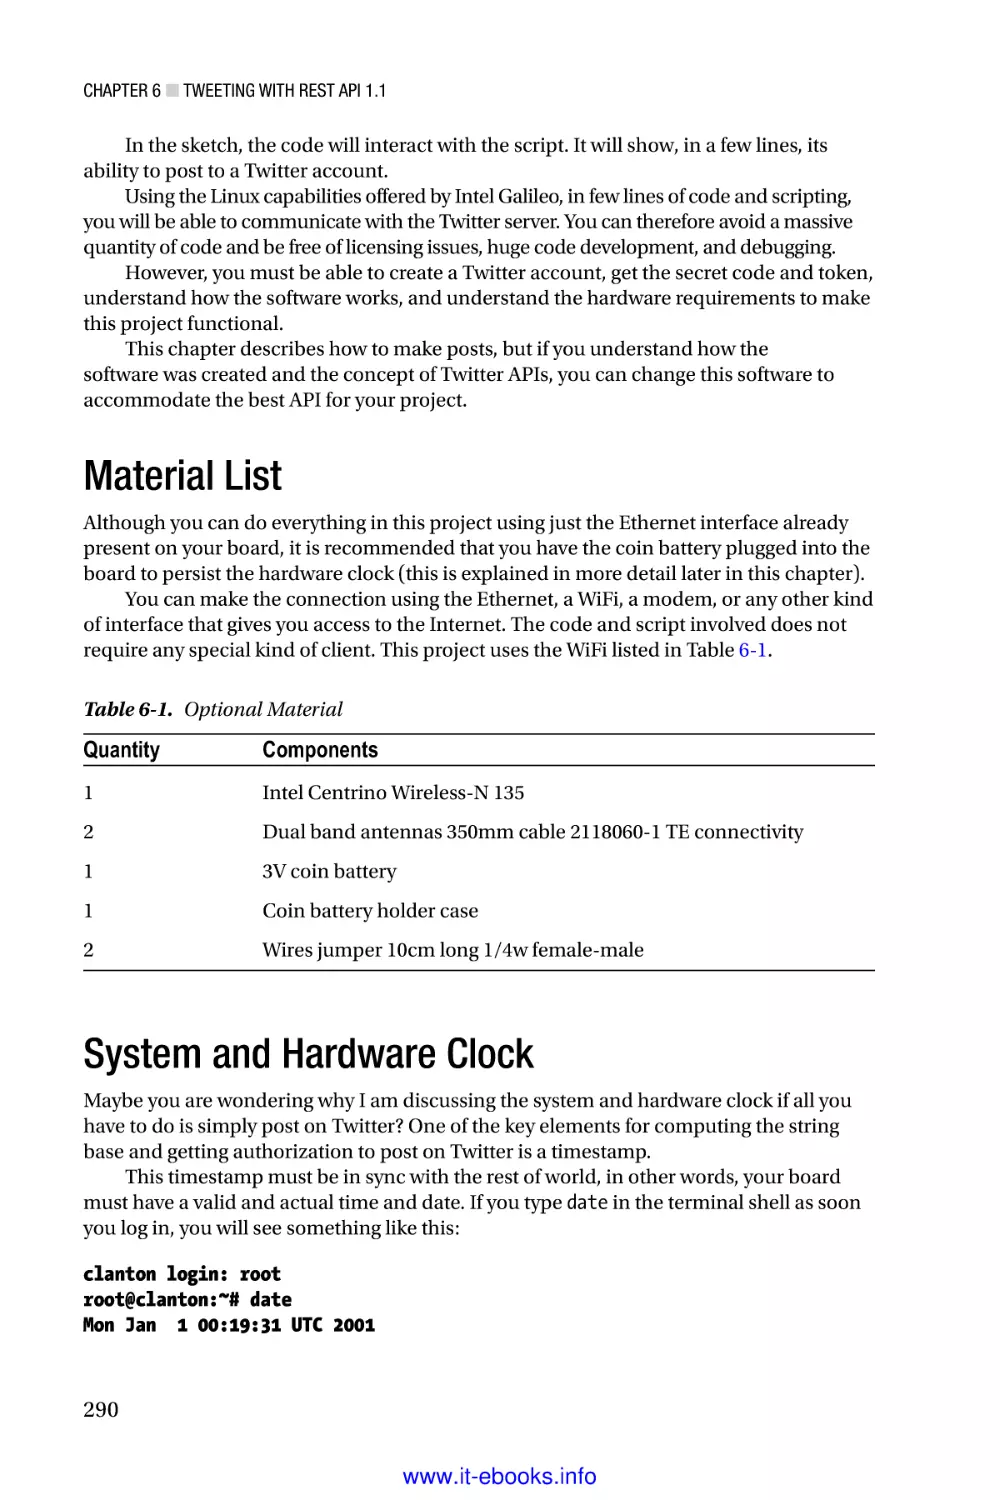 Material List
System and Hardware Clock